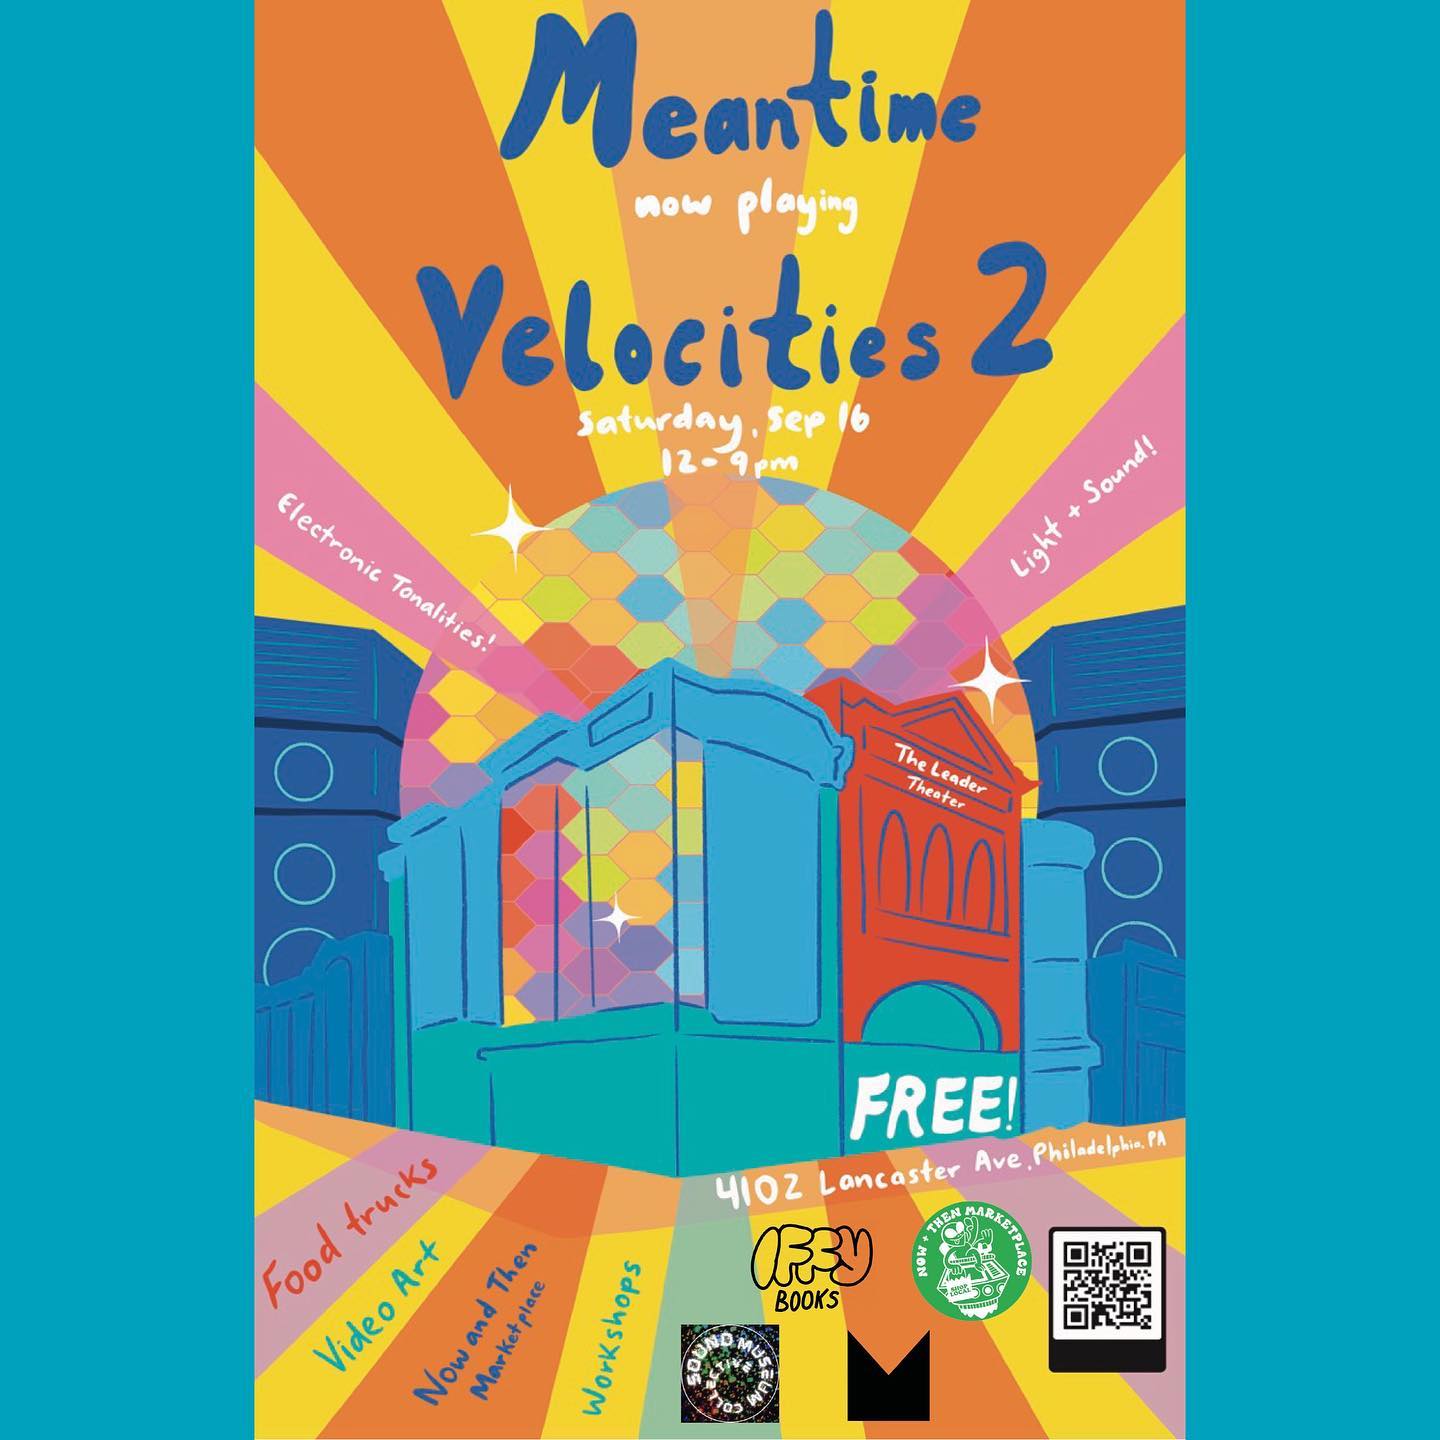 Poster with a colorful illustration of a movie theater with a disco ball emerging from the roof. The text reads "Meantime / now playing / Velocities 2 / Saturday, Sap 16 12–9 p.m. / Electronic Tonalities / Light + Sound! / The Leader Theater / FREE! / 4102 Lancaster Ave. Philadelphia, PA / Food trucks / Video Art / Now and Then Marketplace / Workshops" THe following logos appear at the bottom right: Sound Museum Collective, Iffy Books, Meantime, Now + Then Marketplace